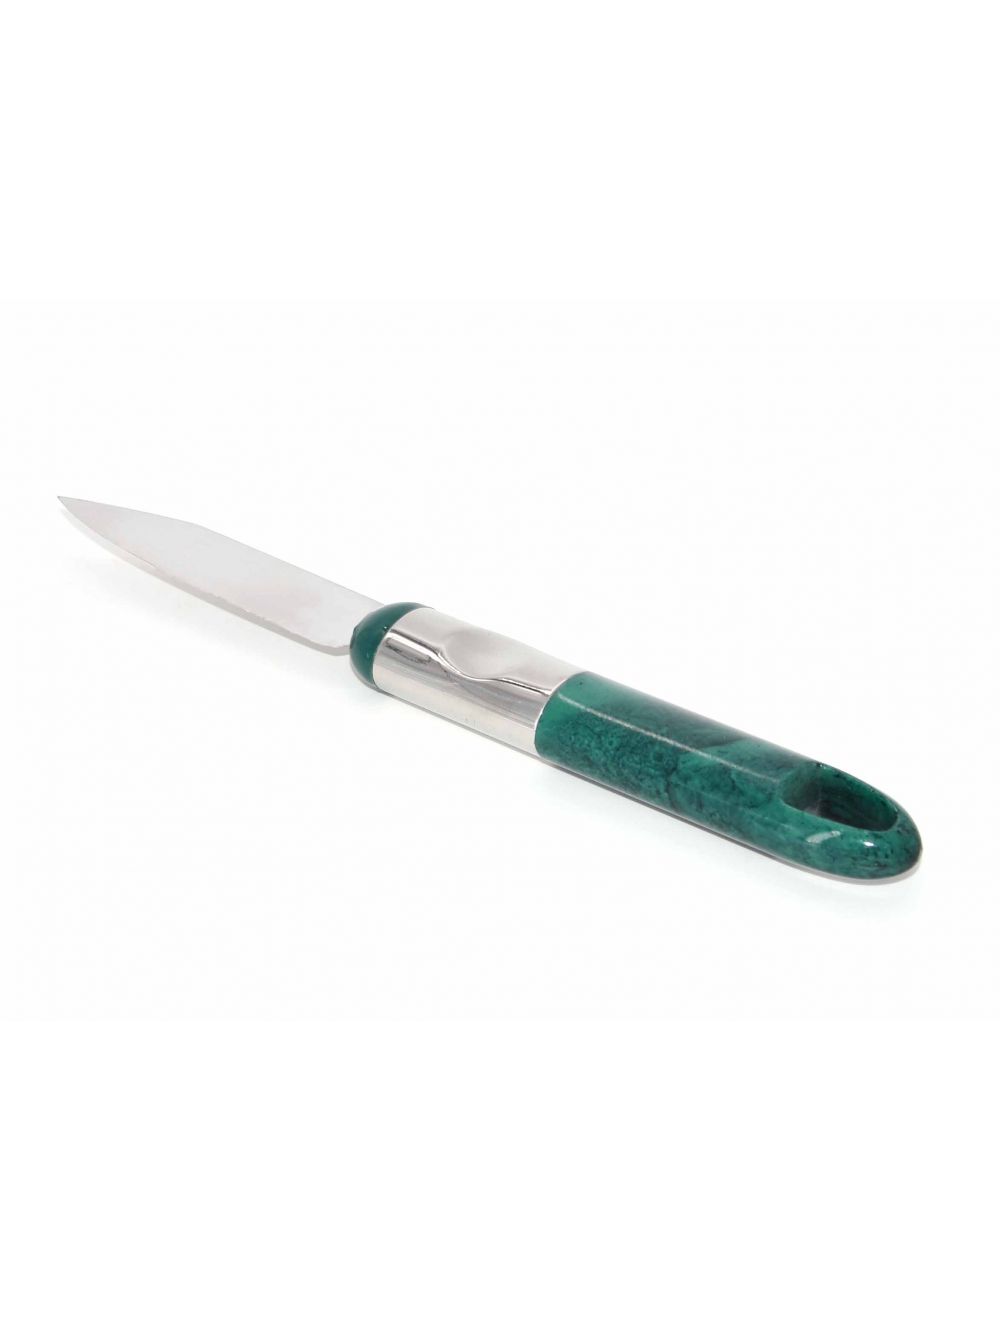 Paring Knife Stainless Steel - Assorted